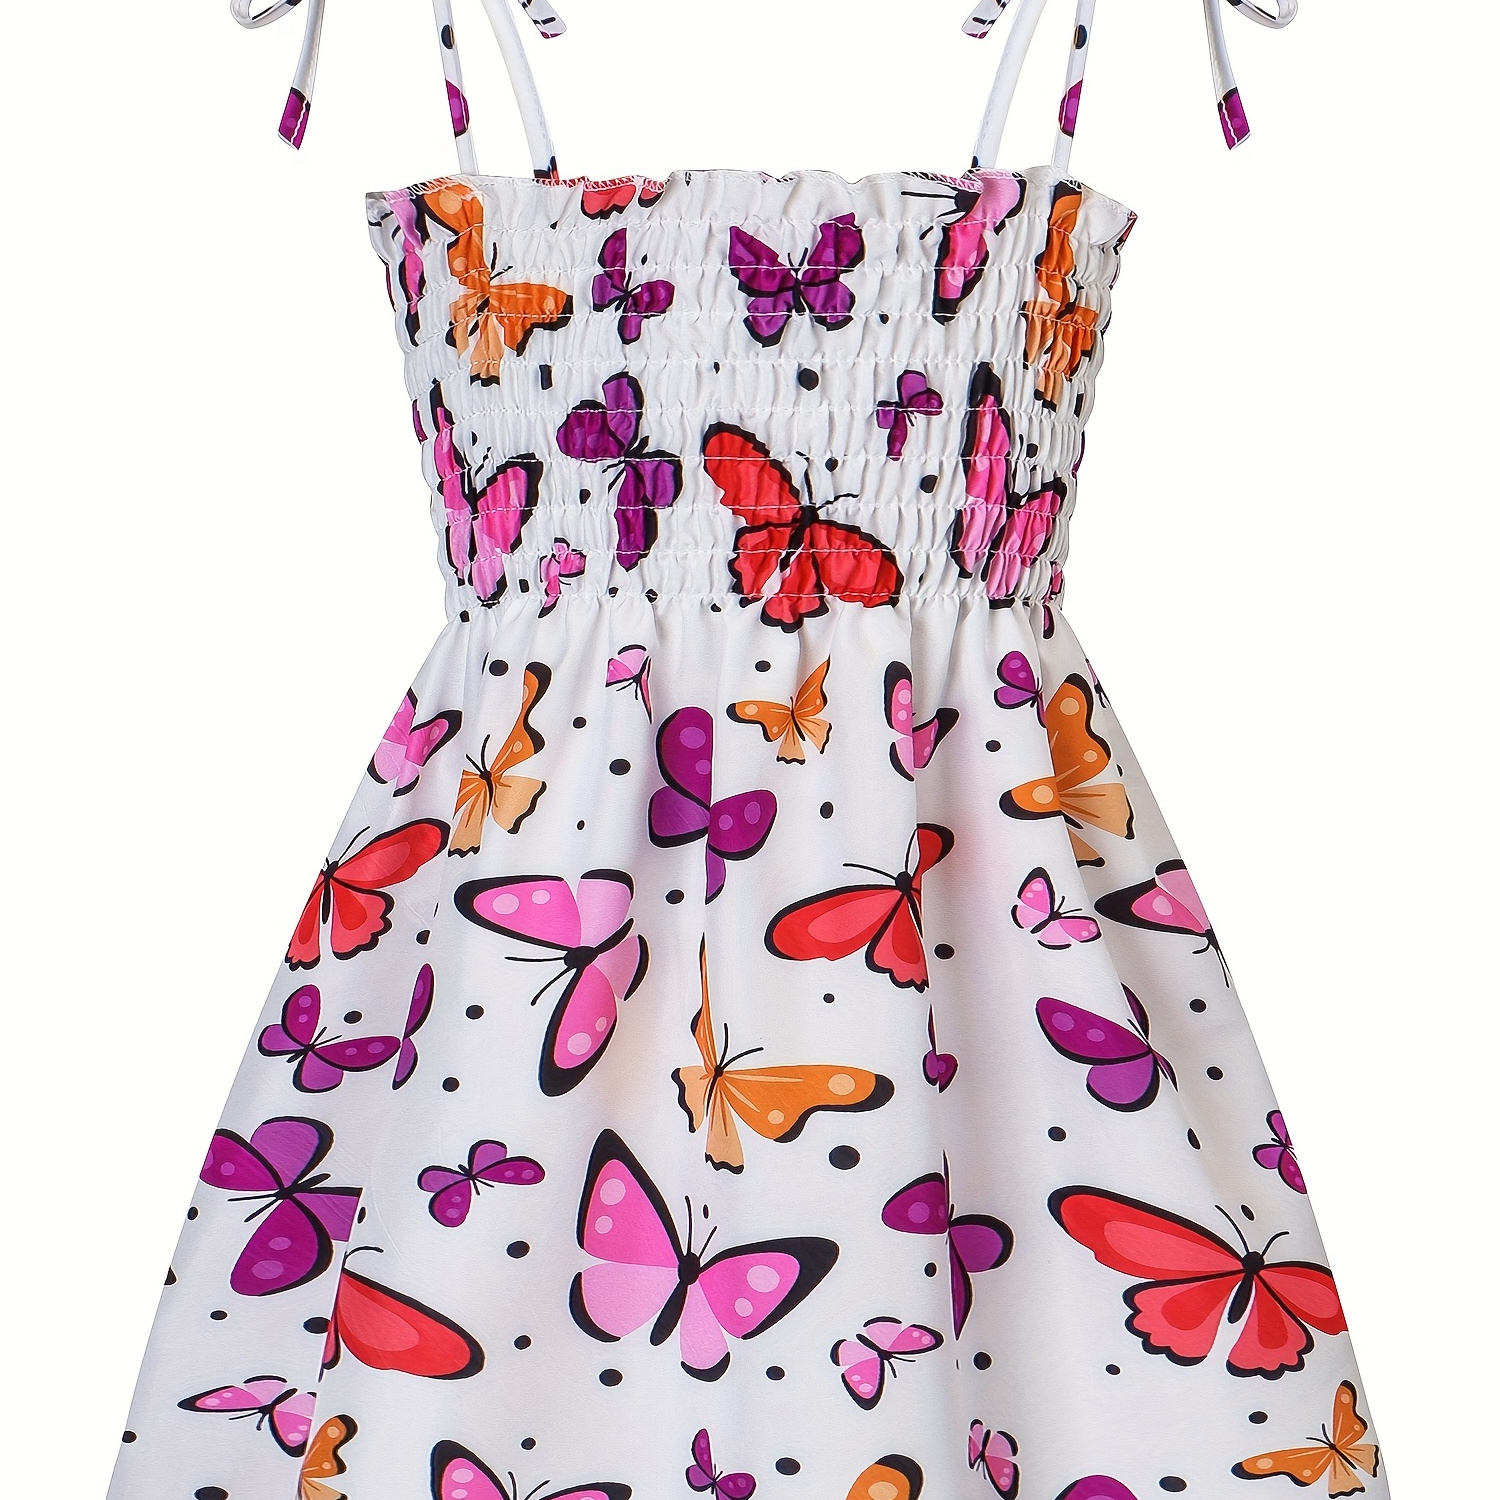 

Girl's Lace-up Athleisure Dress Colorful Butterflies/ Daisy/ Dinosaurs Print Sleeveless Smocked A-line Sundress For Girls